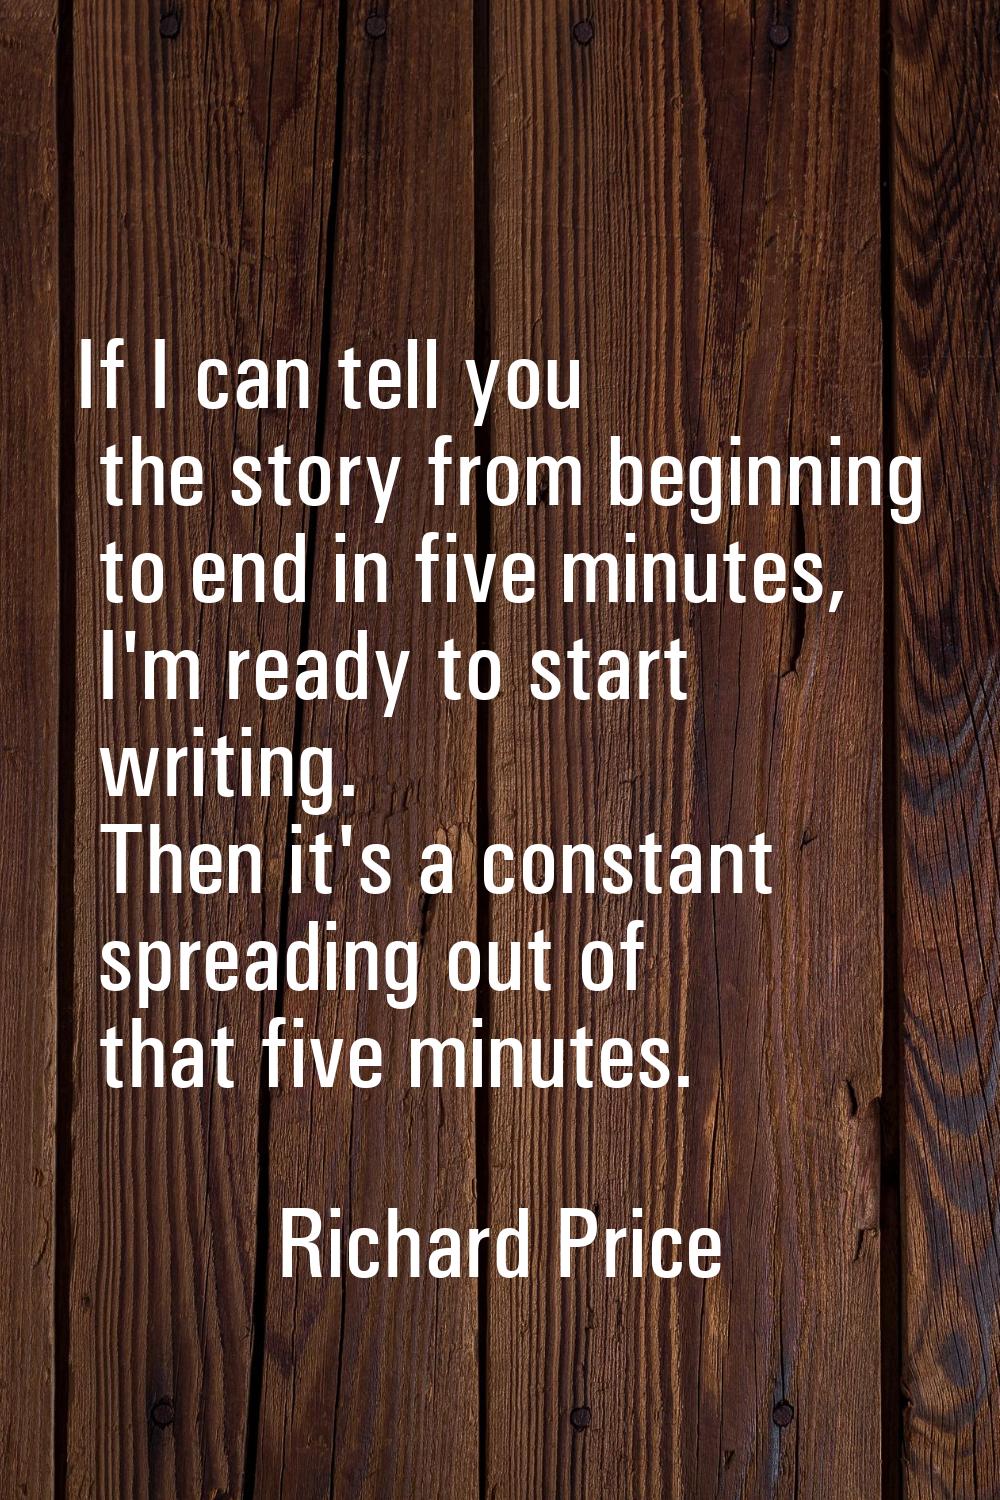 If I can tell you the story from beginning to end in five minutes, I'm ready to start writing. Then